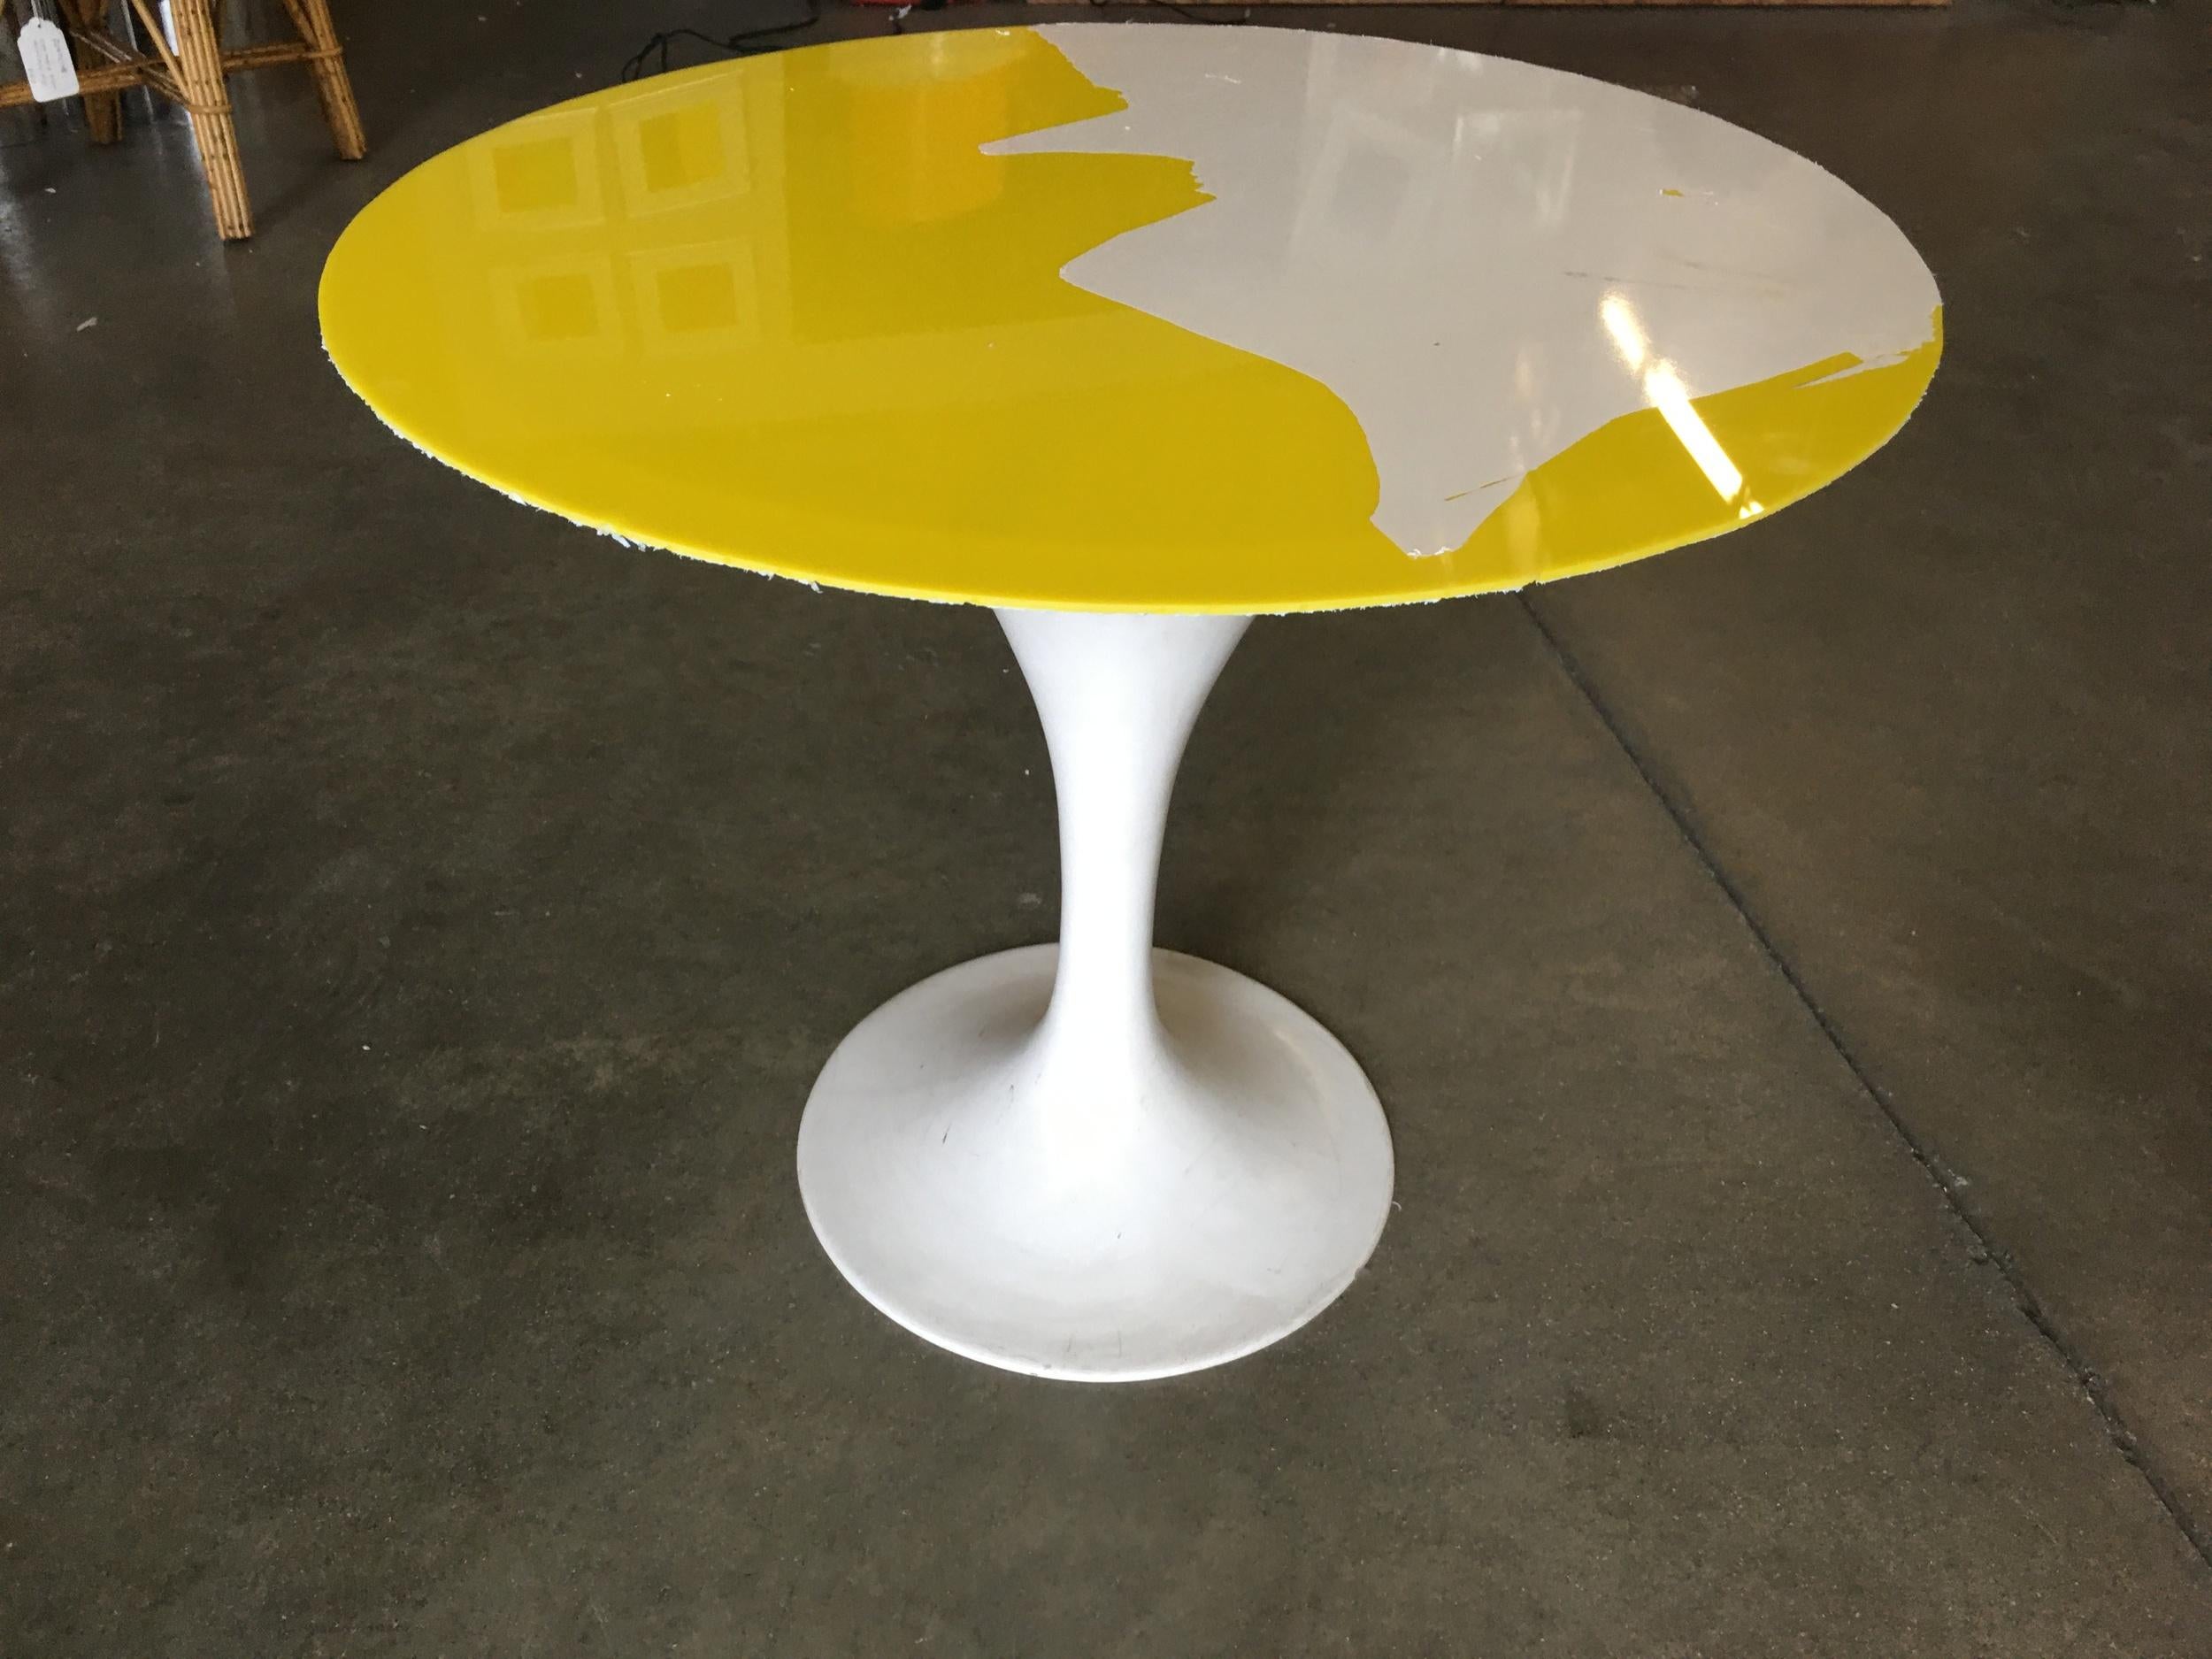 Modernist Light Up Tulip Style Coffee Table In Excellent Condition For Sale In Van Nuys, CA